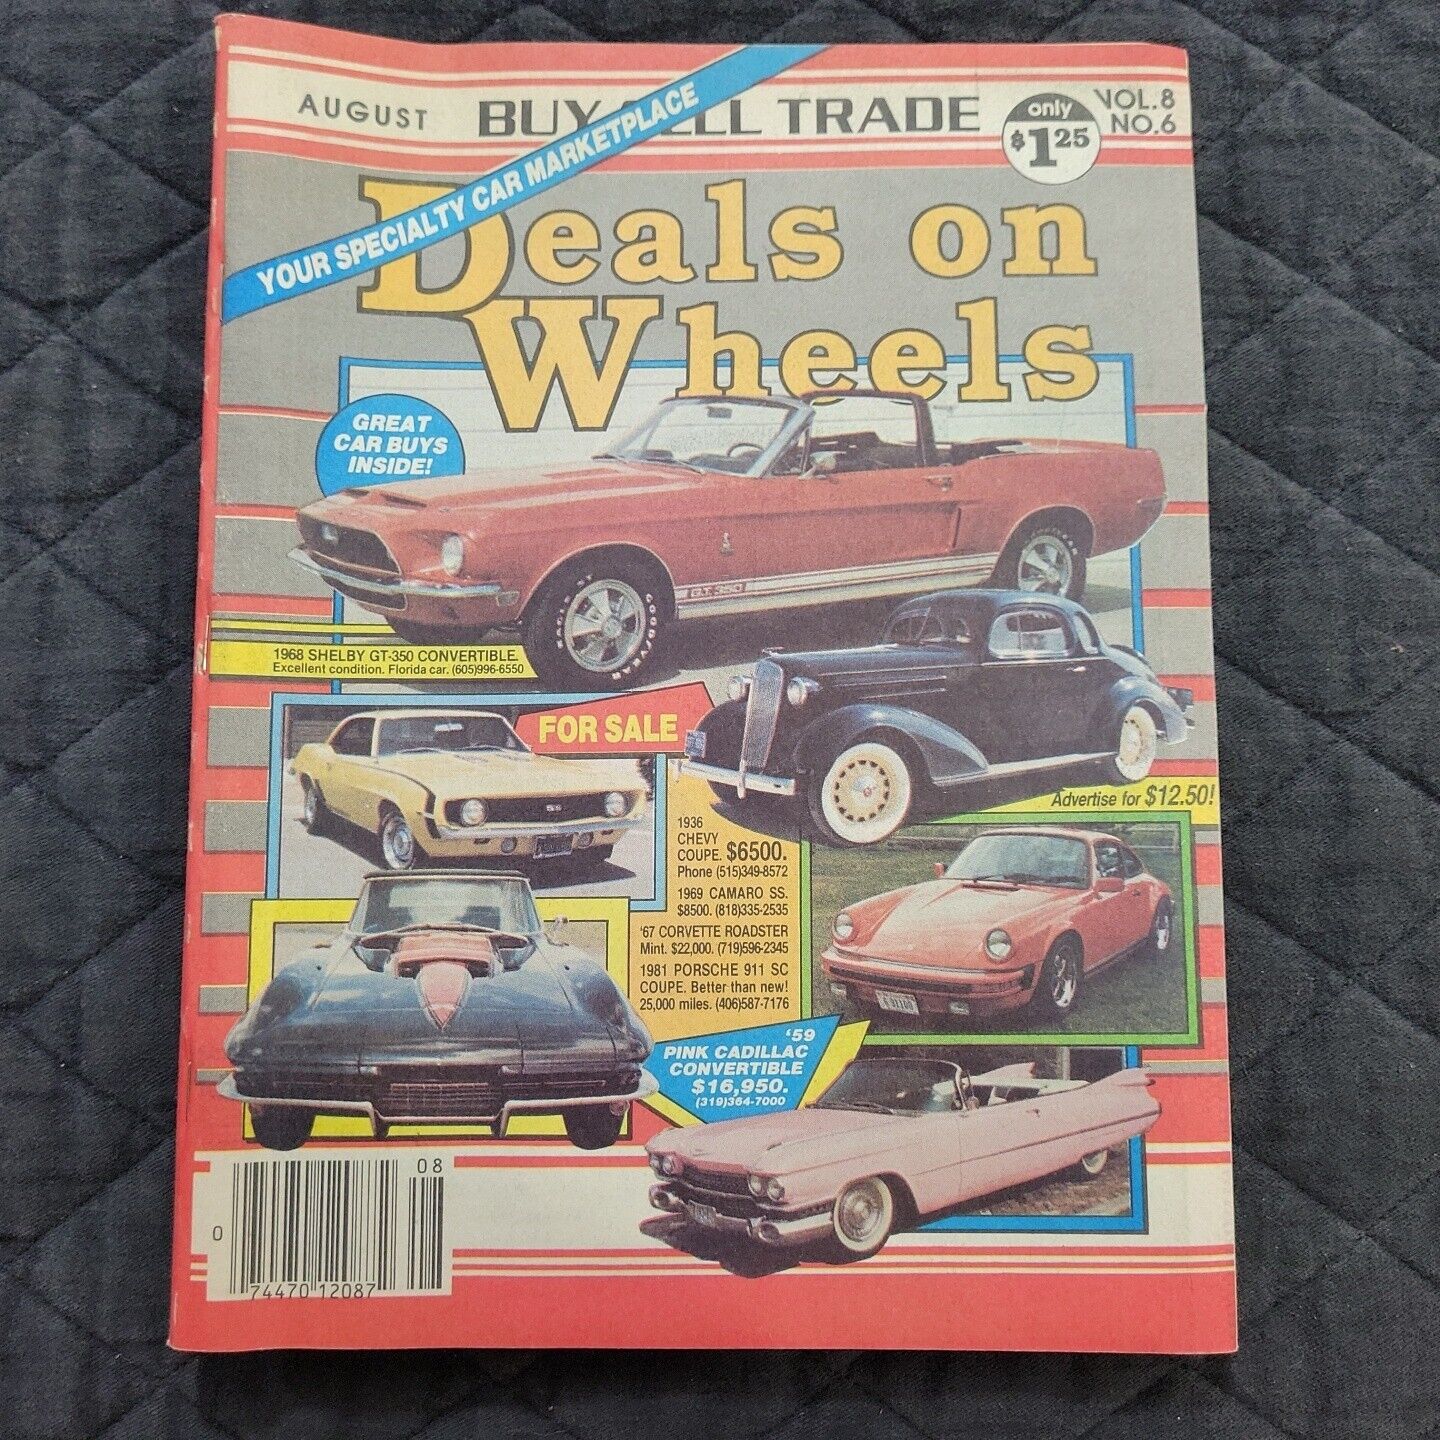 Vintage Buy Sell Trade August 1988 Deals On Wheels Specialty Car Magazine